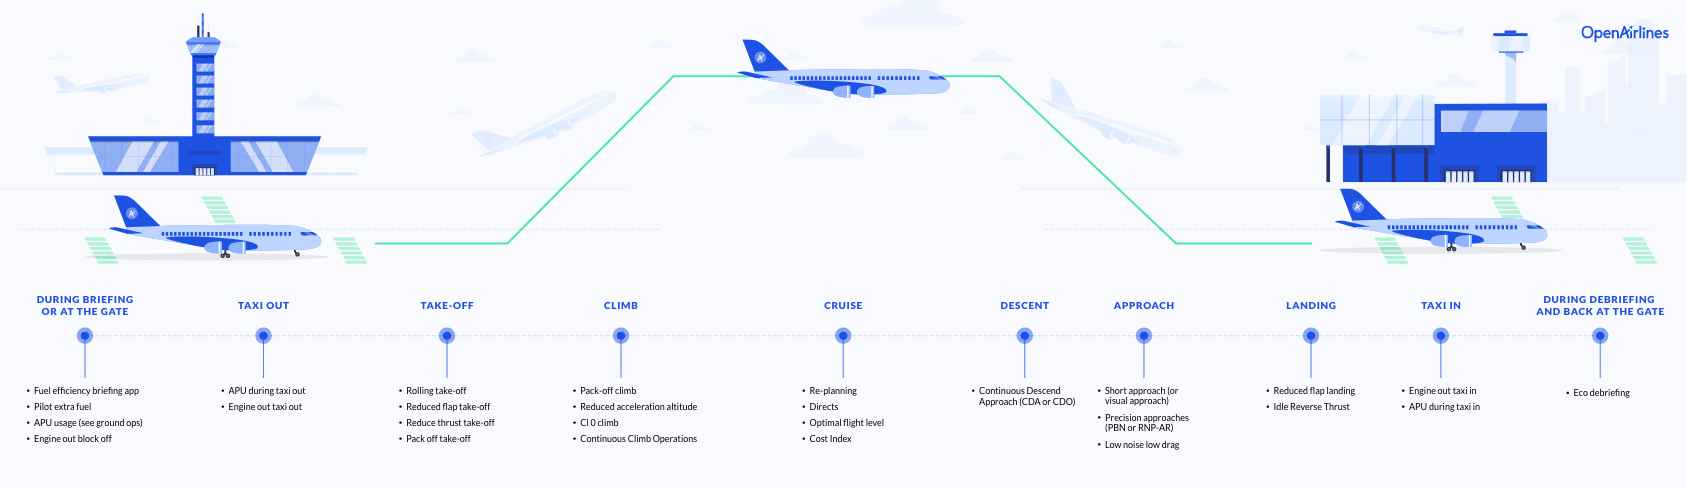 best-practices-per-phase-of-flight-infography-openairlines-web